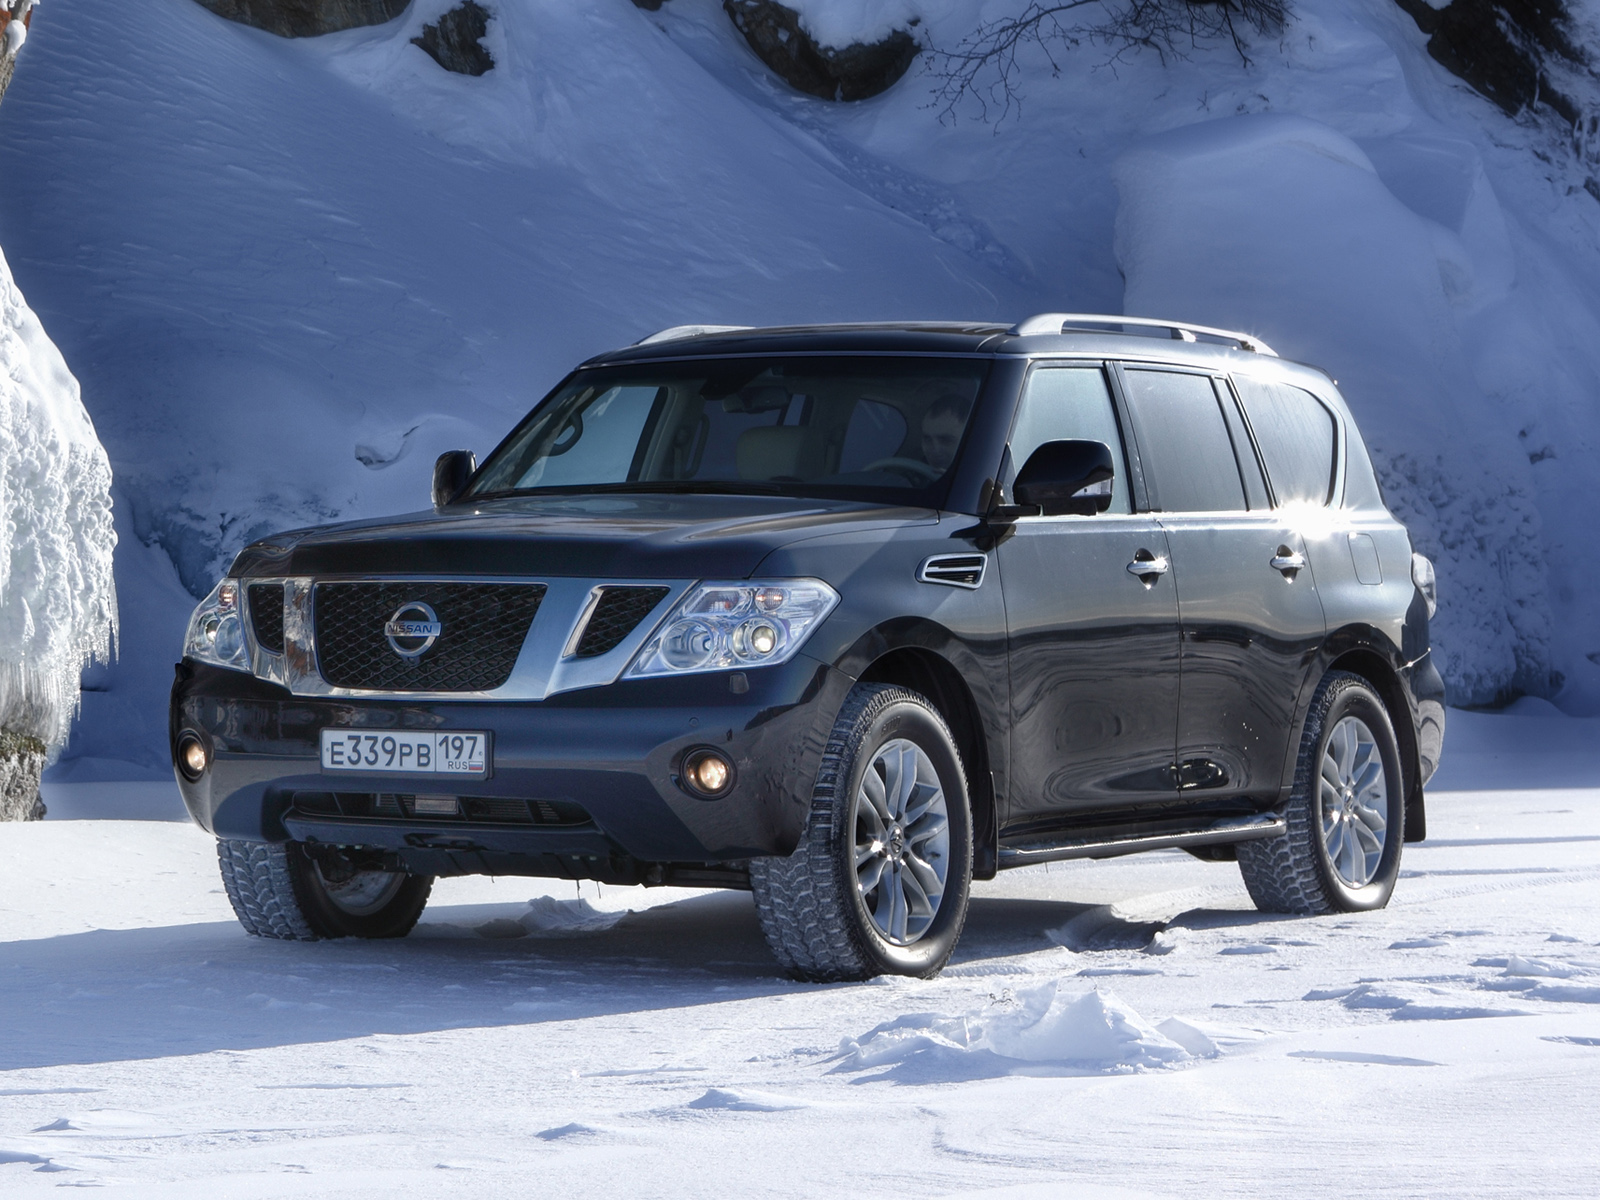 Nissan Patrol Picture Photo Gallery